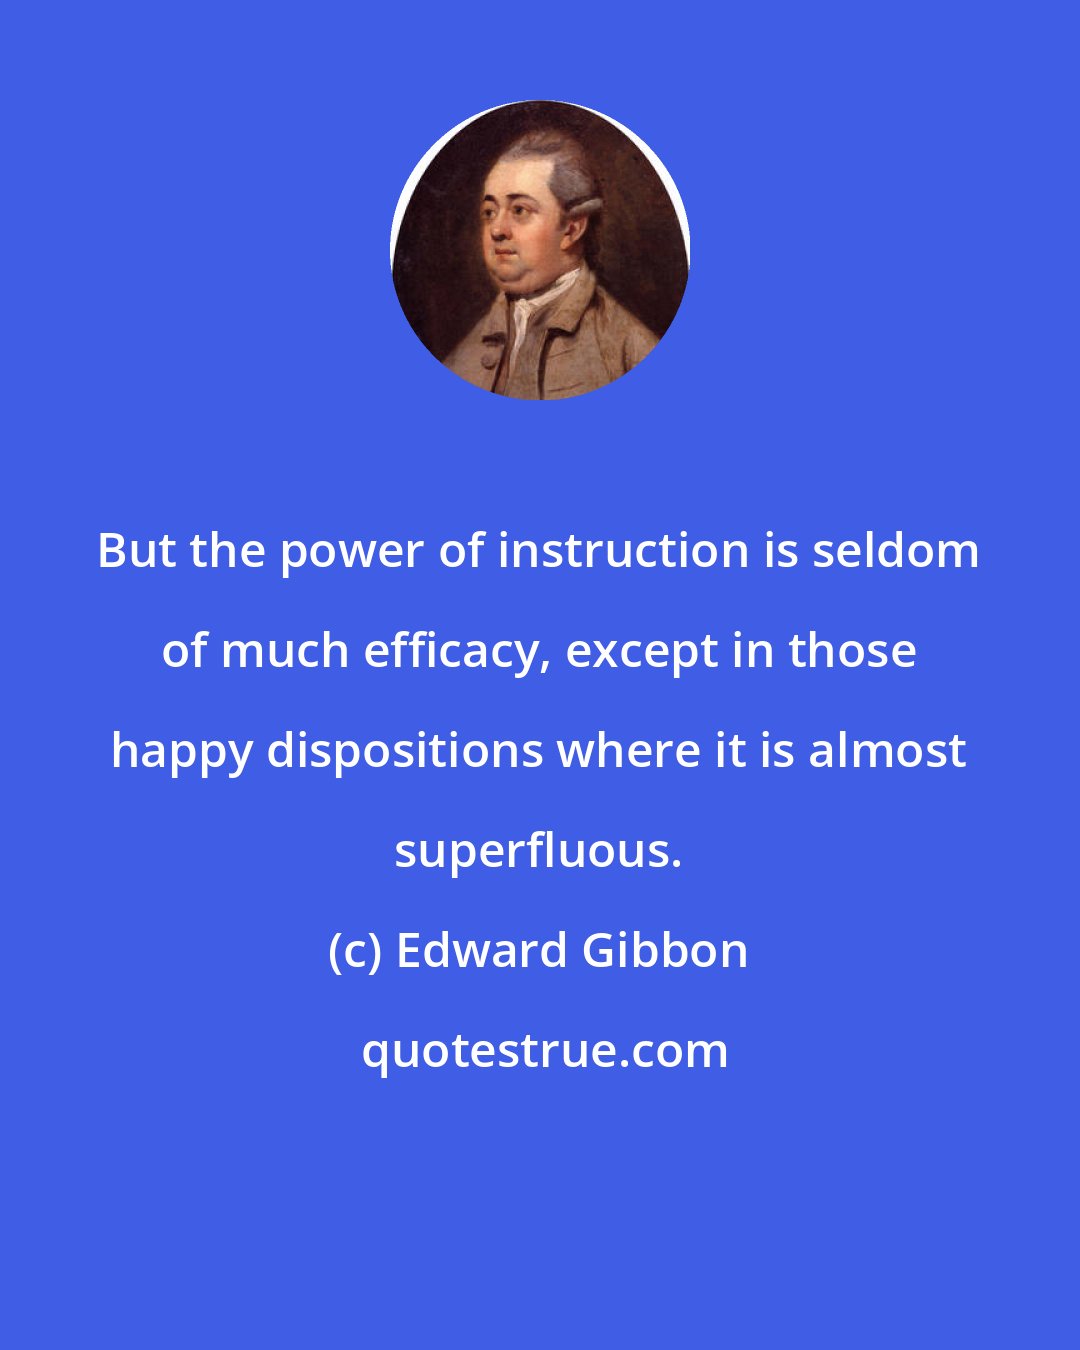 Edward Gibbon: But the power of instruction is seldom of much efficacy, except in those happy dispositions where it is almost superfluous.